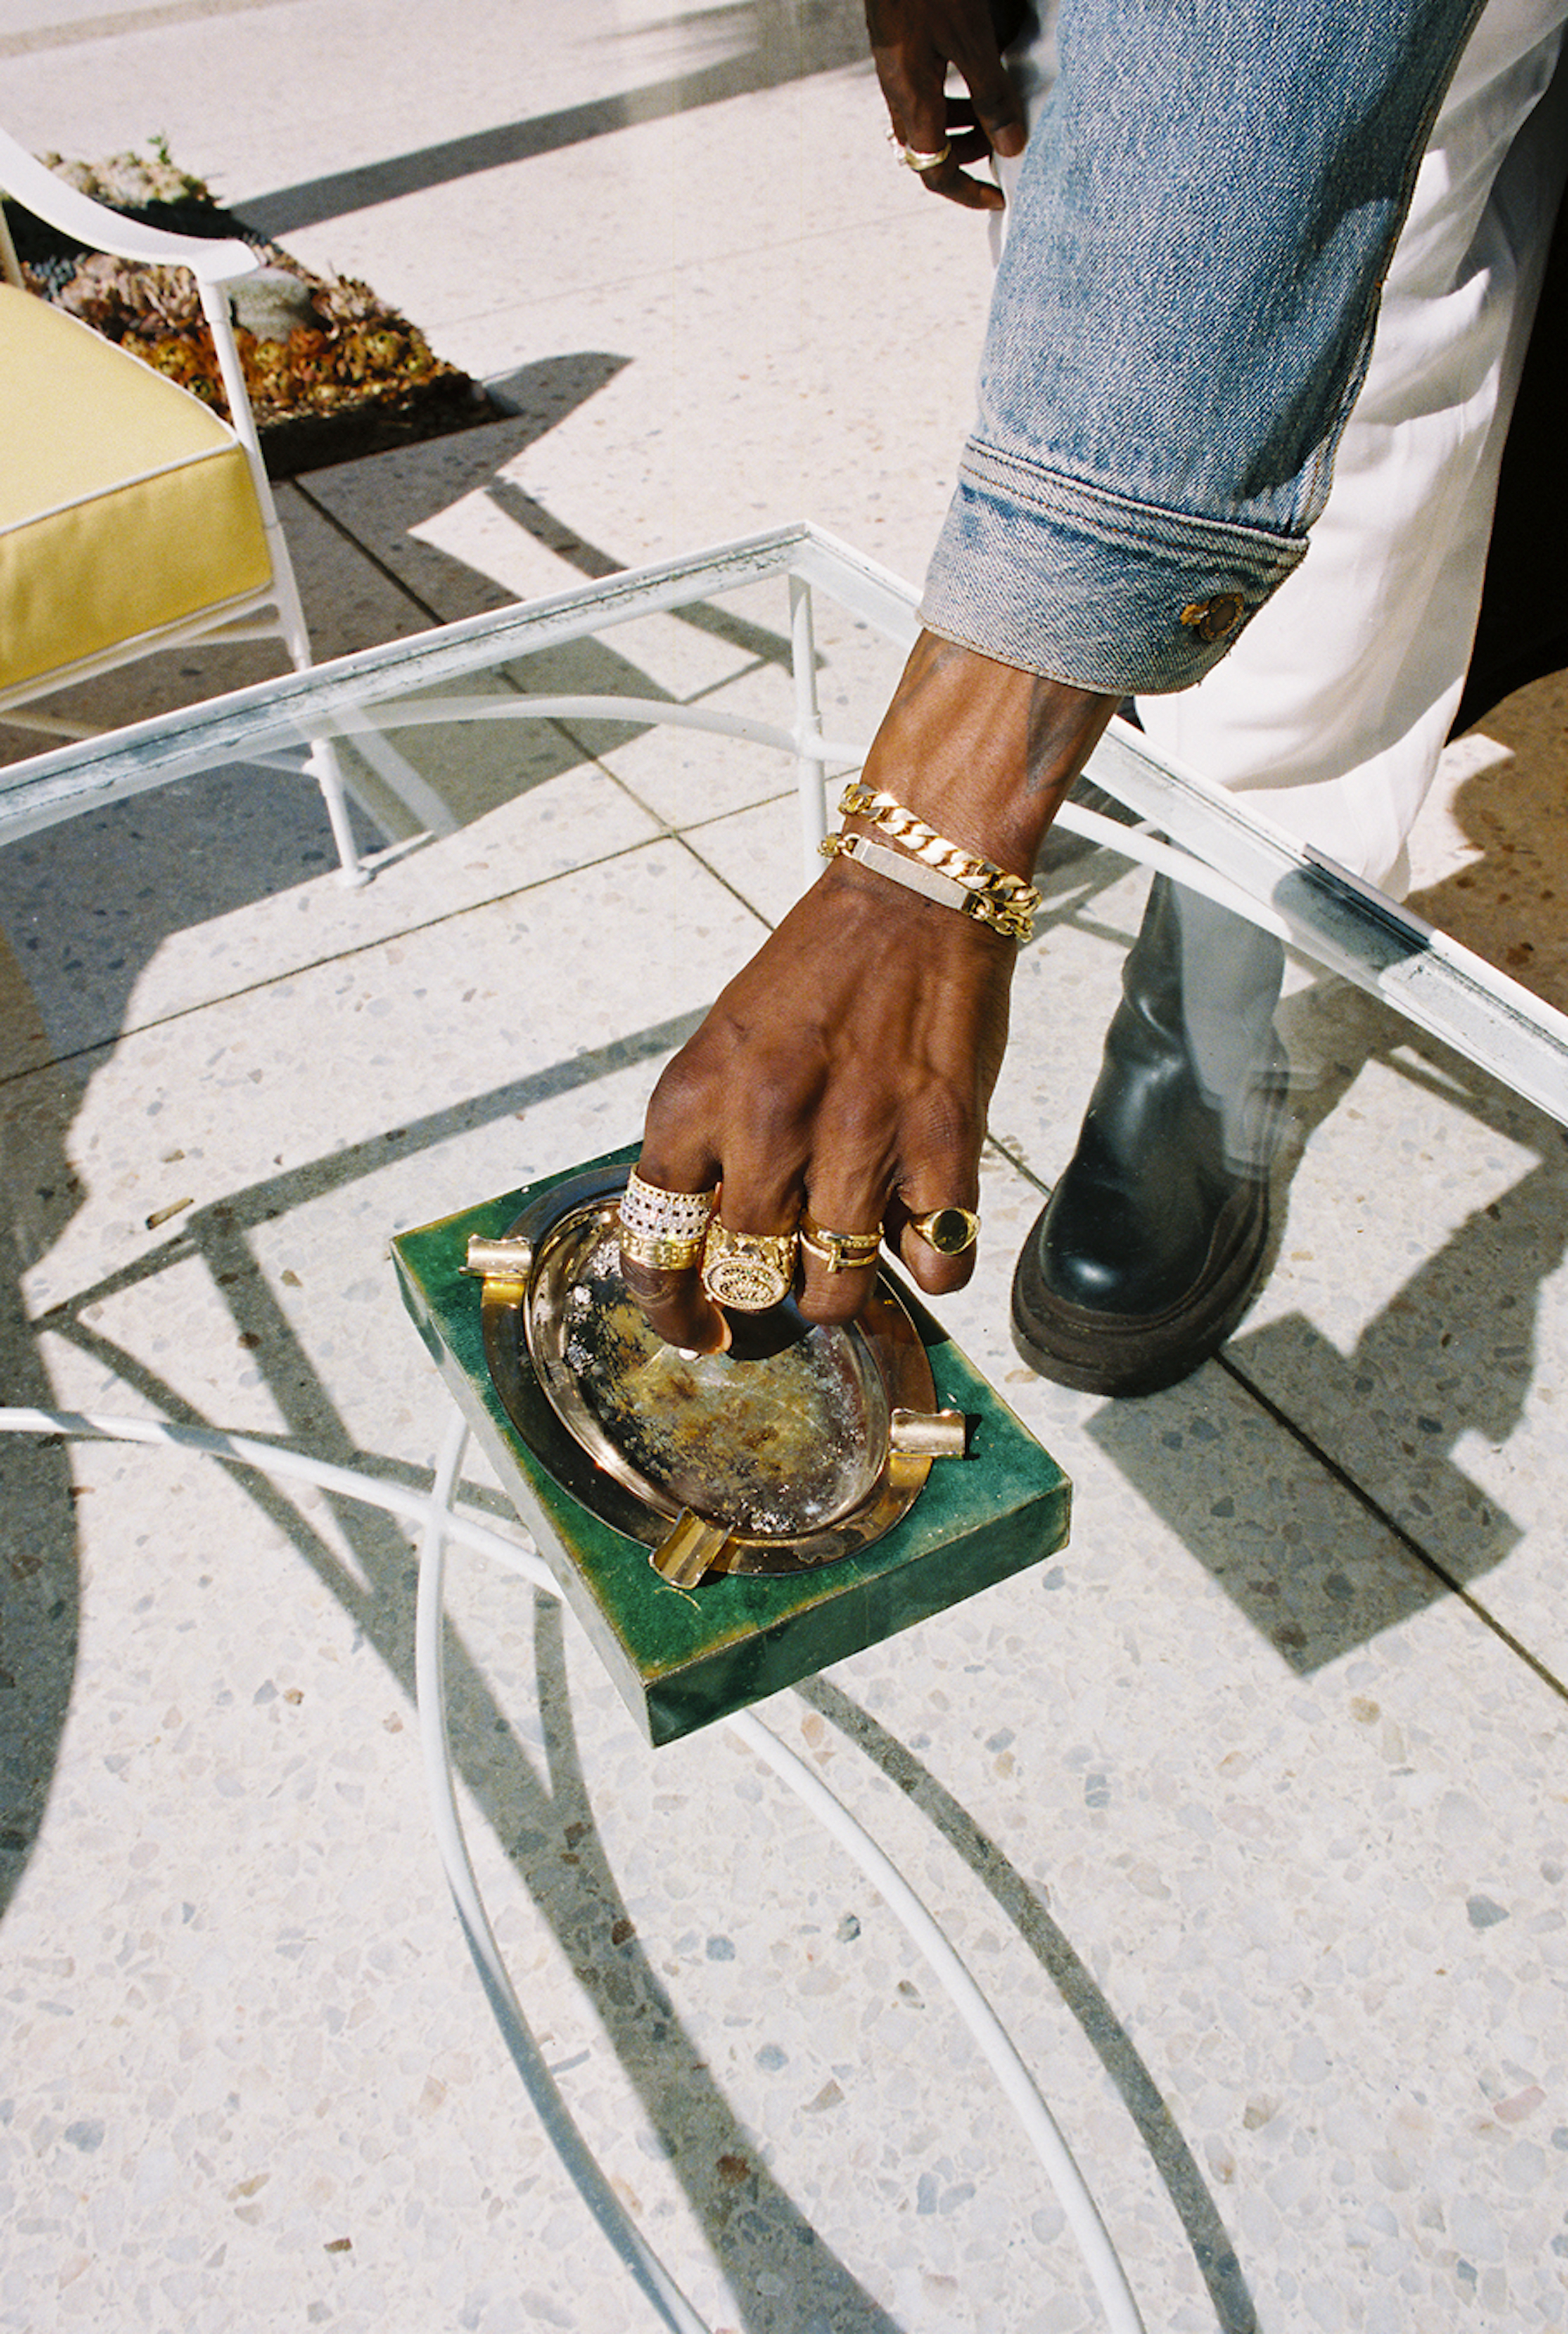 A $ AP Nast's arm reaches down to put out a cigarette on a jade stone gold-plated ashtray photographed by Bladimir Corniel